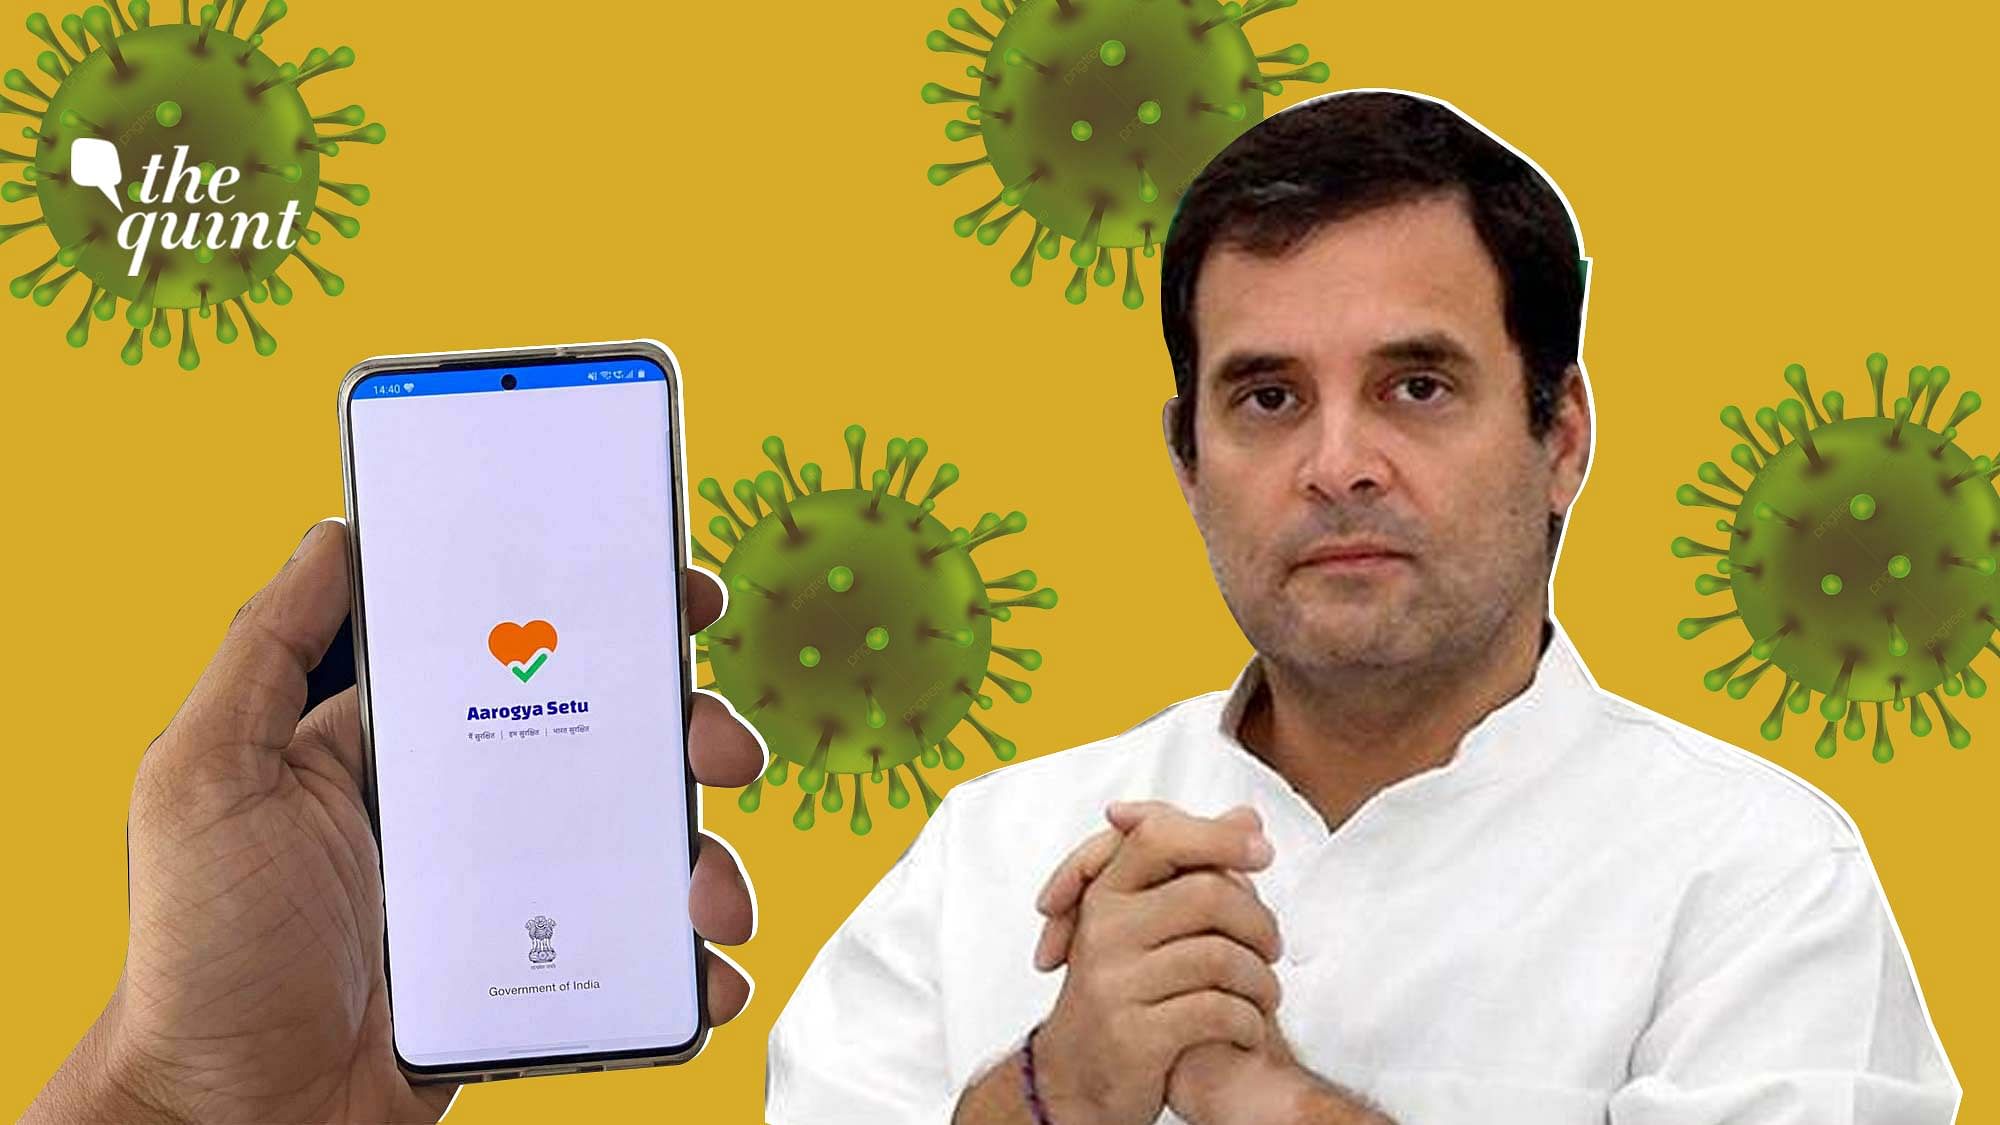 Congress MP Rahul Gandhi, in a sharp criticism of the government’s Aarogya Setu App, on Saturday, 2 May, described it as a “sophisticated surveillance system”.